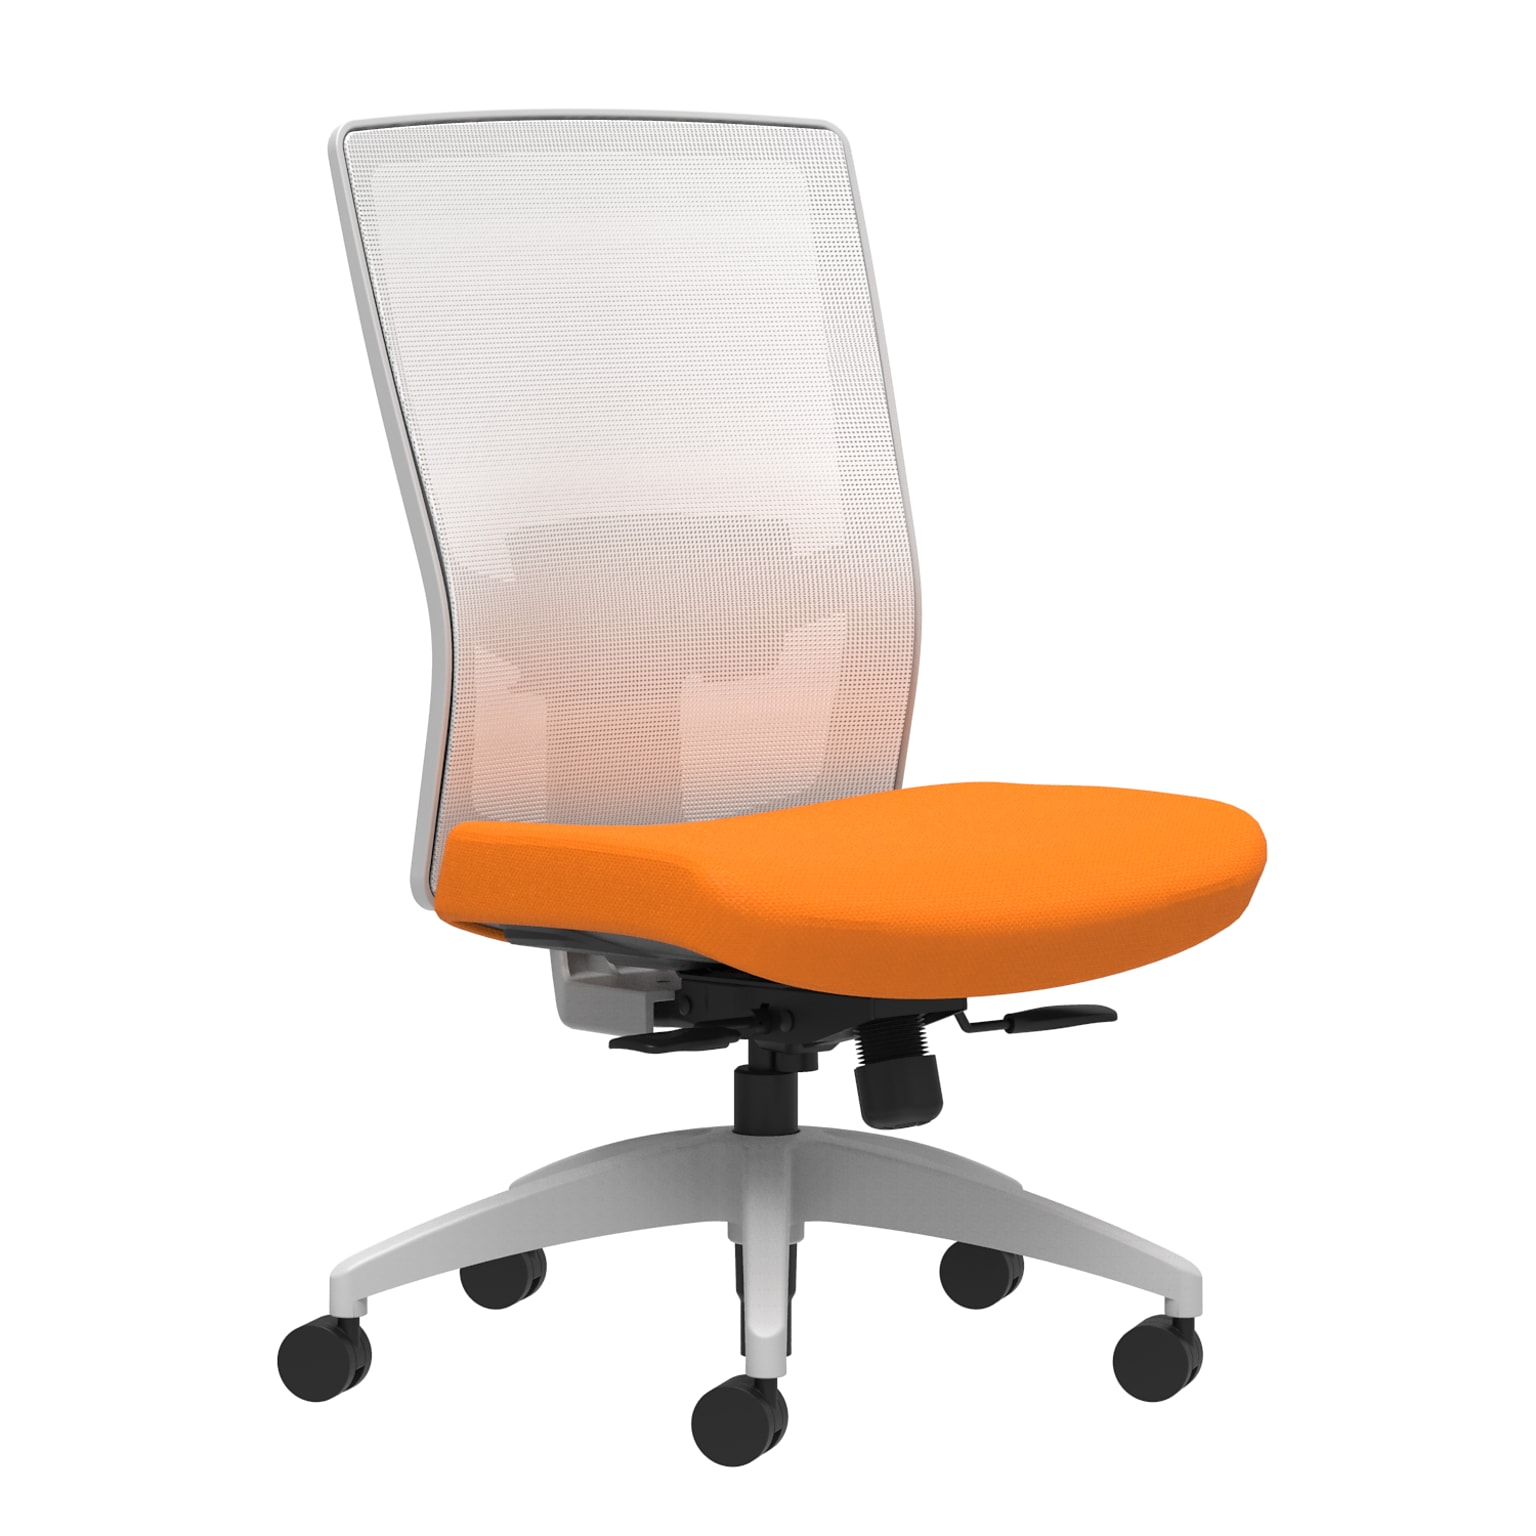 Union & Scale Workplace2.0™ Fabric Task Chair, Apricot, Adjustable Lumbar, Armless, Synchro-Tilt w/ Seat Slide Control (53493)